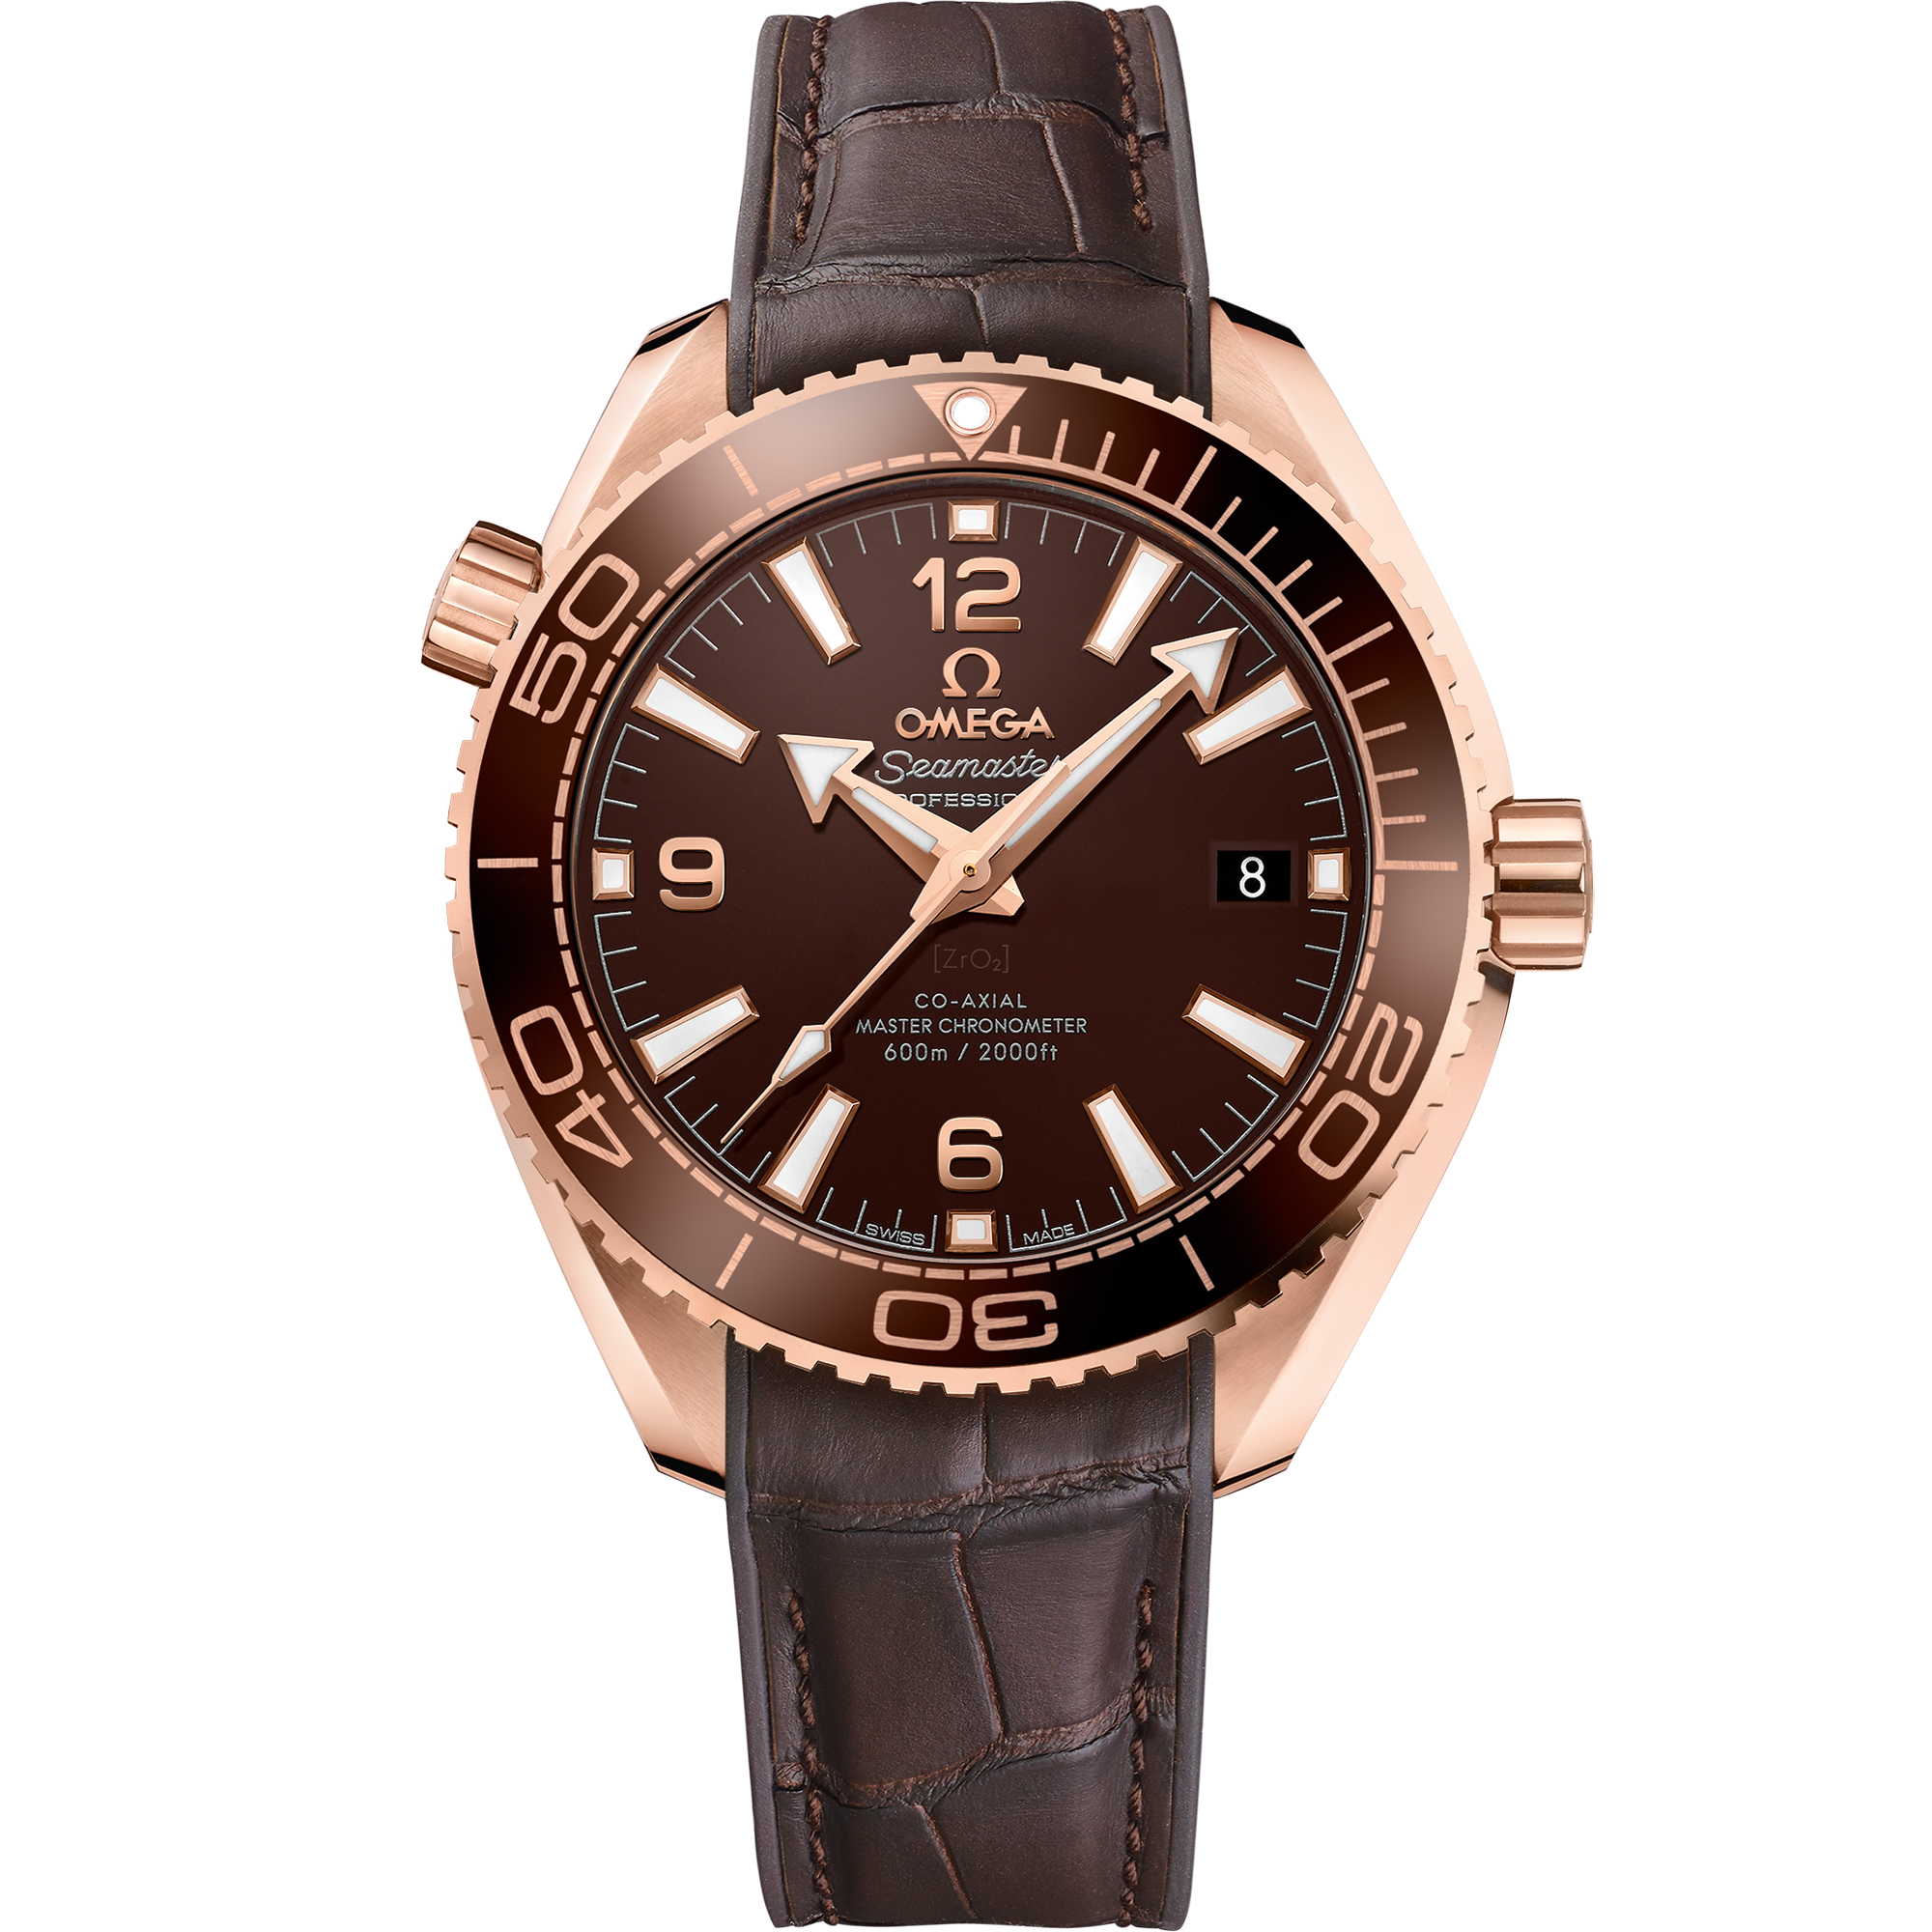 Seamaster Planet Ocean 600M 39.5 mm, Sedna™ gold on leather strap with rubber lining